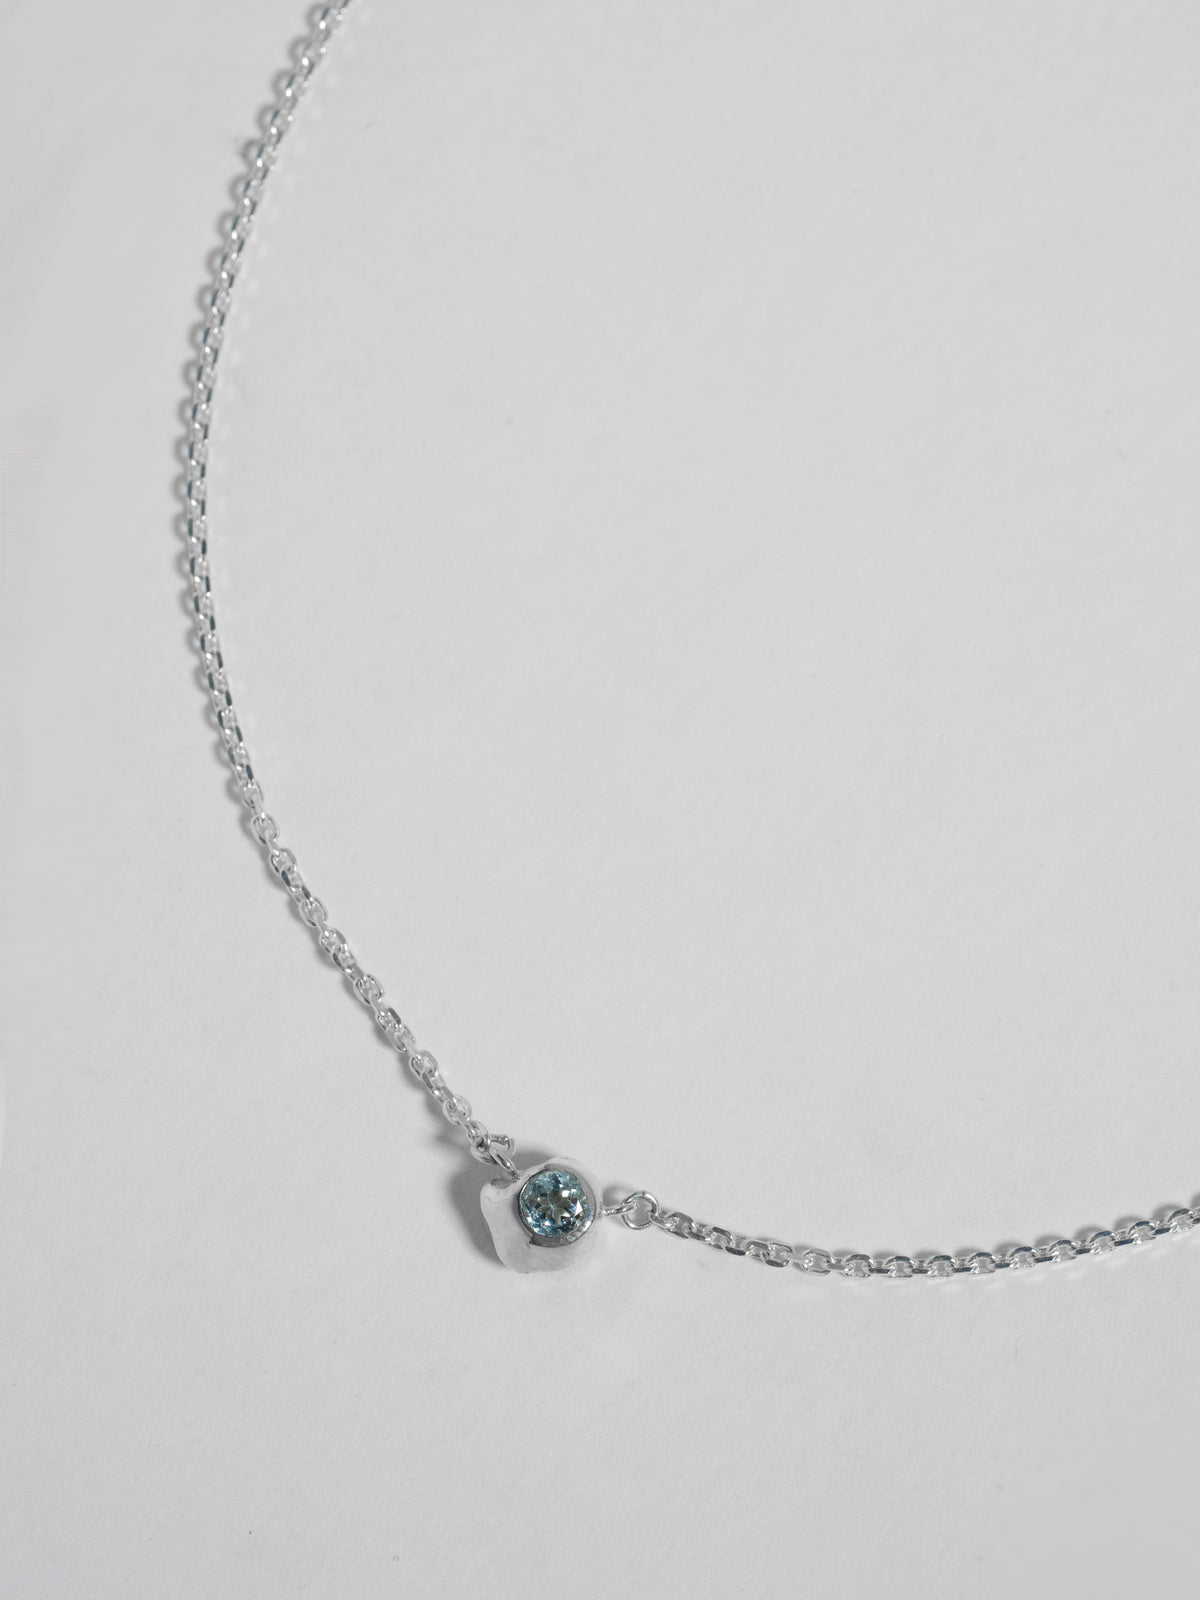 Close up product image of FARIS KIRA Necklace pendant in sterling silver with topaz